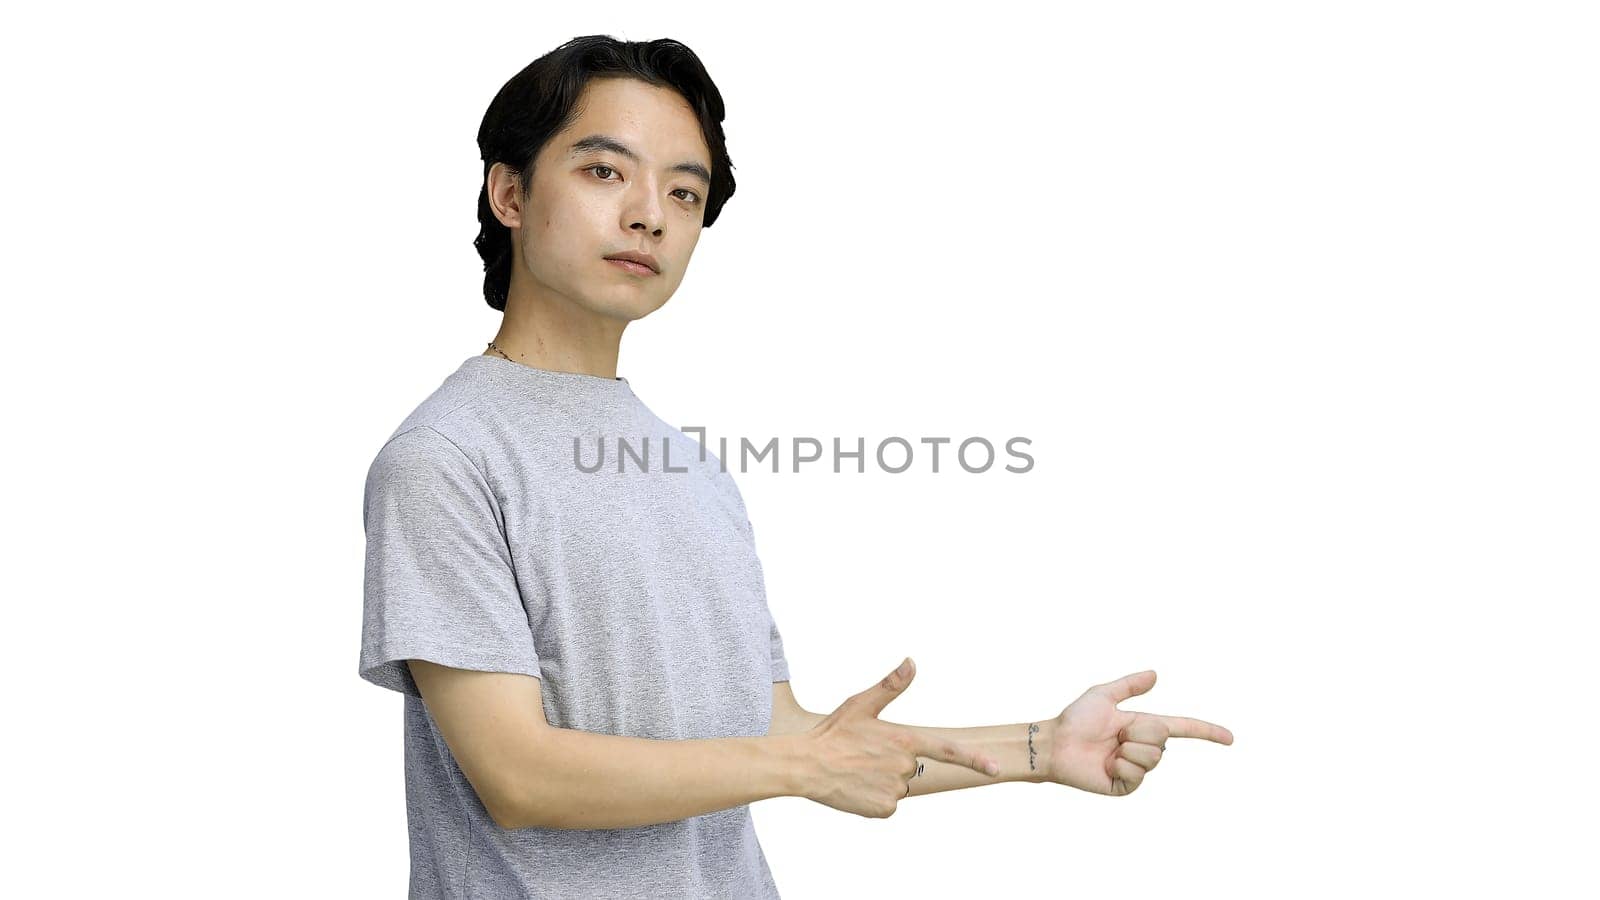 A guy in a gray T-shirt, on a white background, close-up, pointing side.